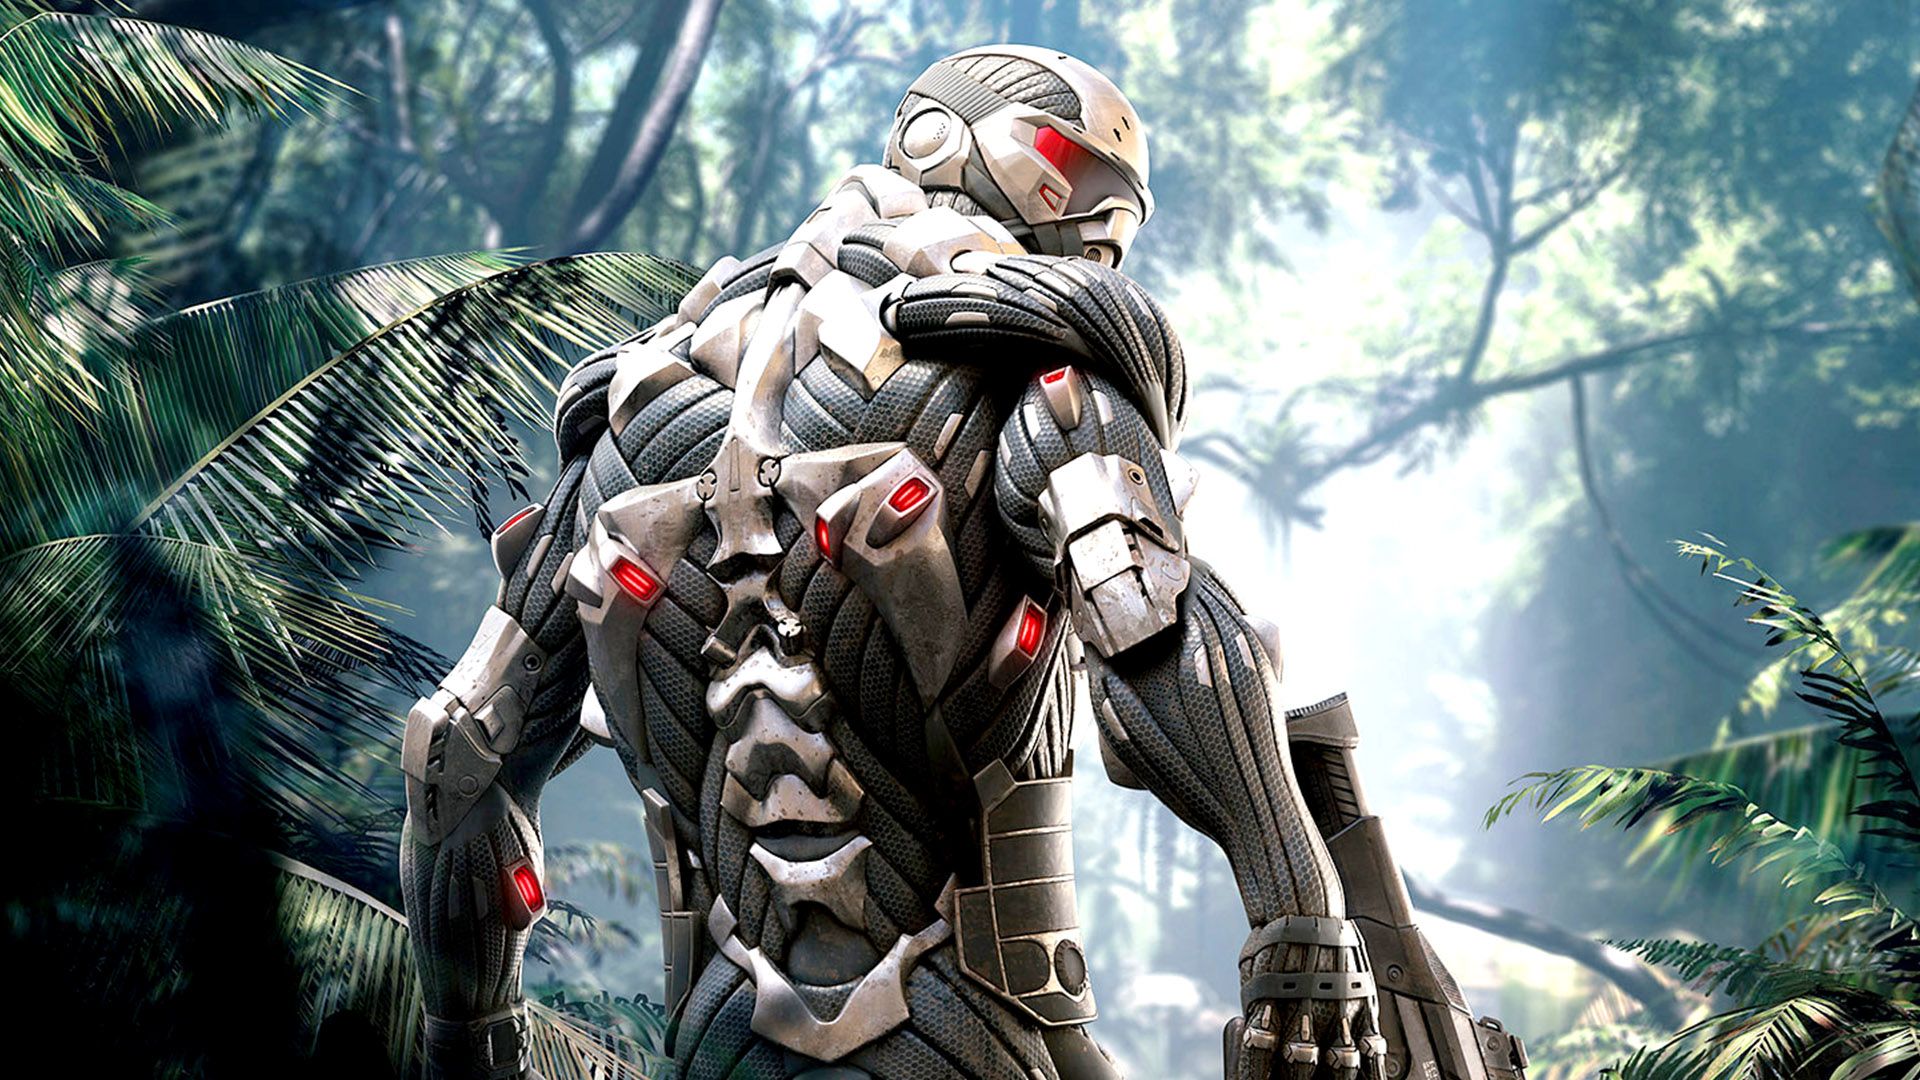 Page 2 of Crysis 4K wallpapers for your desktop or mobile screen